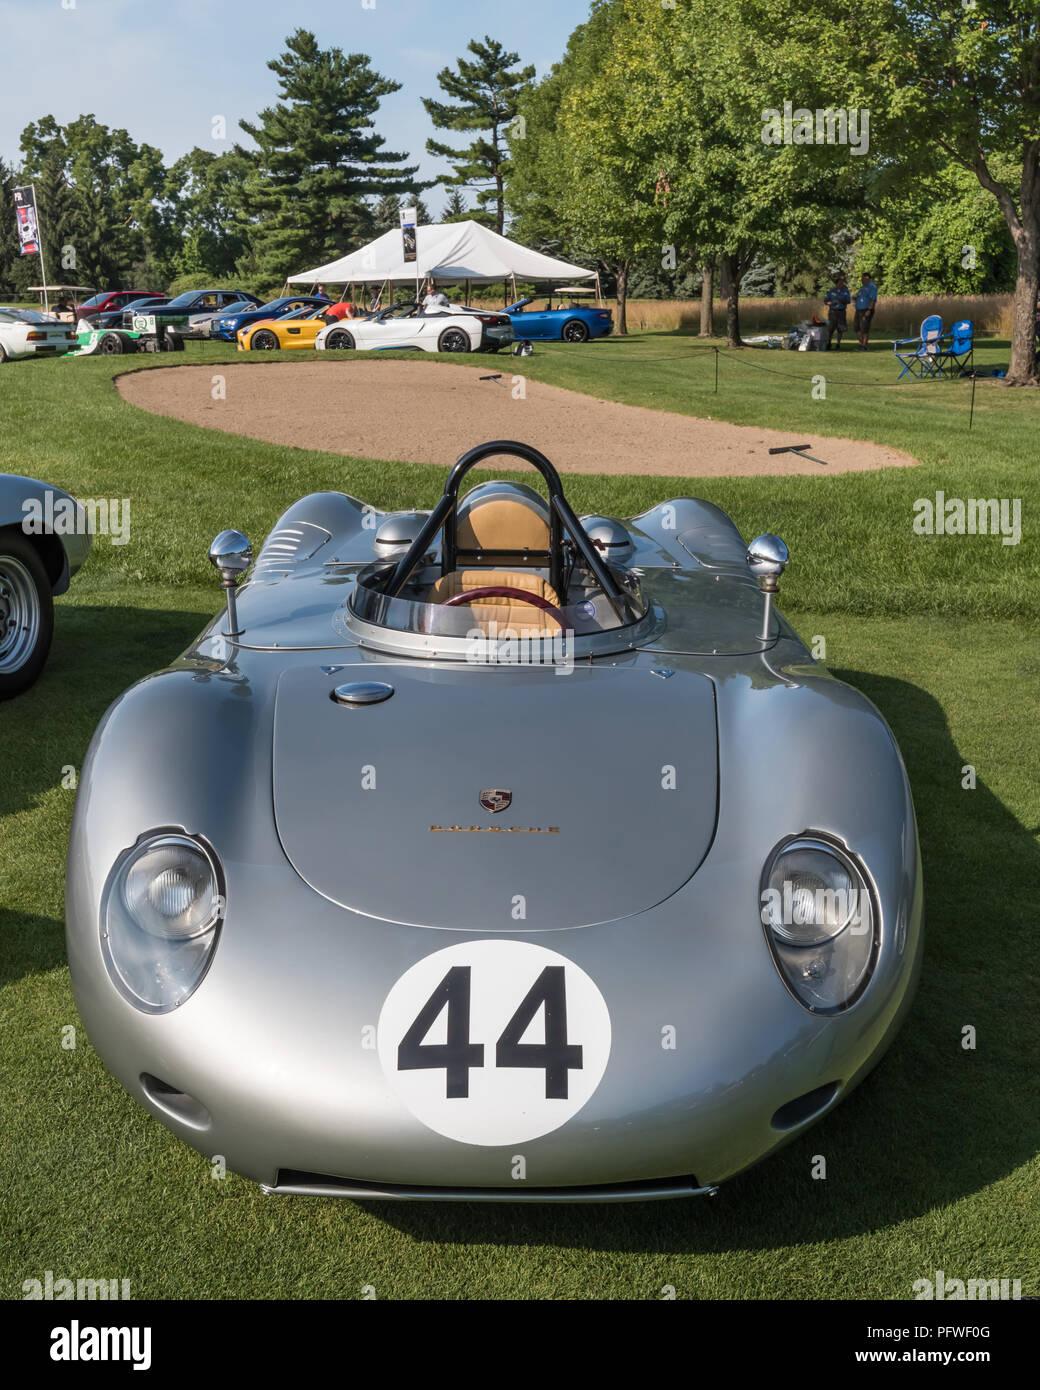 PLYMOUTH, MI/USA - JULY 29, 2018: A 1959 Porsche RSK 718 Le Mans racecar on display at the Concours d'Elegance of America car show. Stock Photo